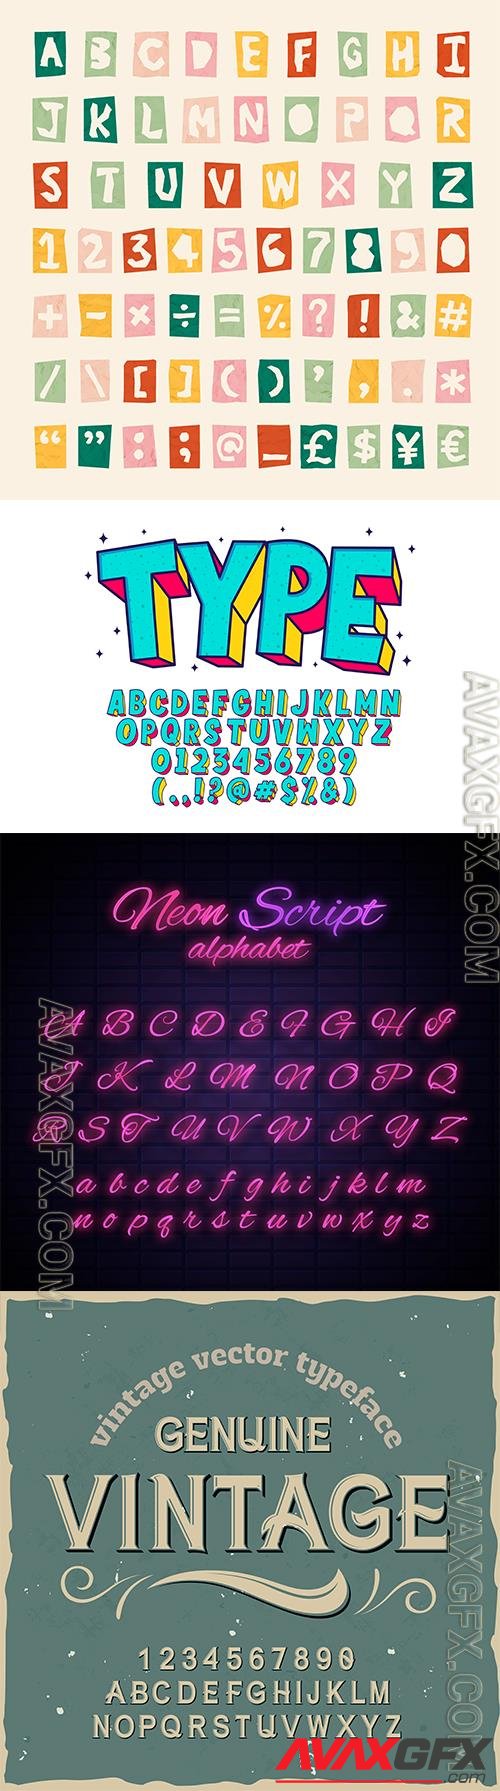 Alphabet and numbers font lettering